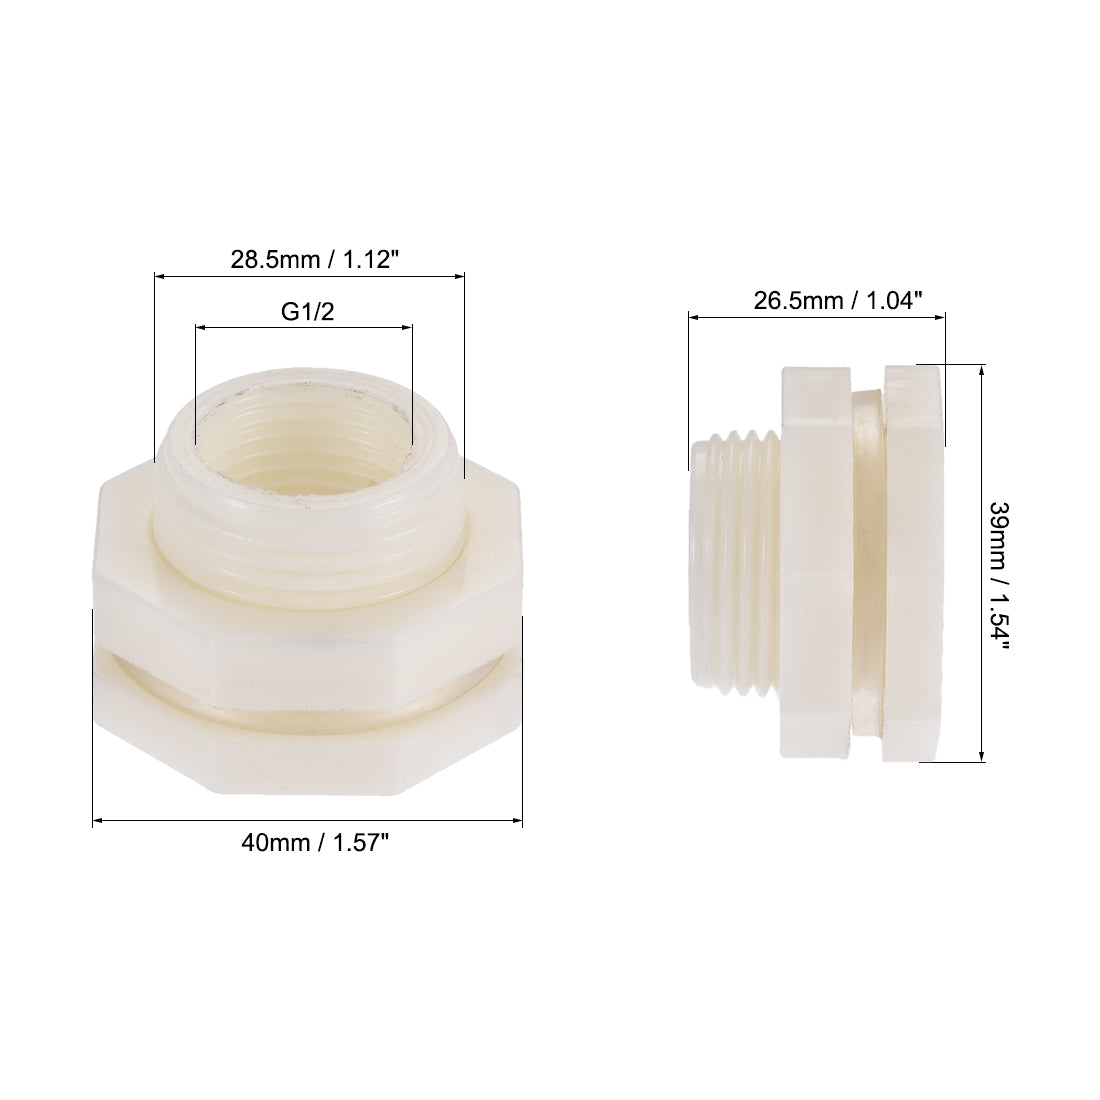 Uxcell Uxcell Bulkhead Fitting, G1 Female 1.73" Male, Tube Adaptor Fitting, with Silicone Gasket and Pipe Connector, for Water Tanks, PVC, White